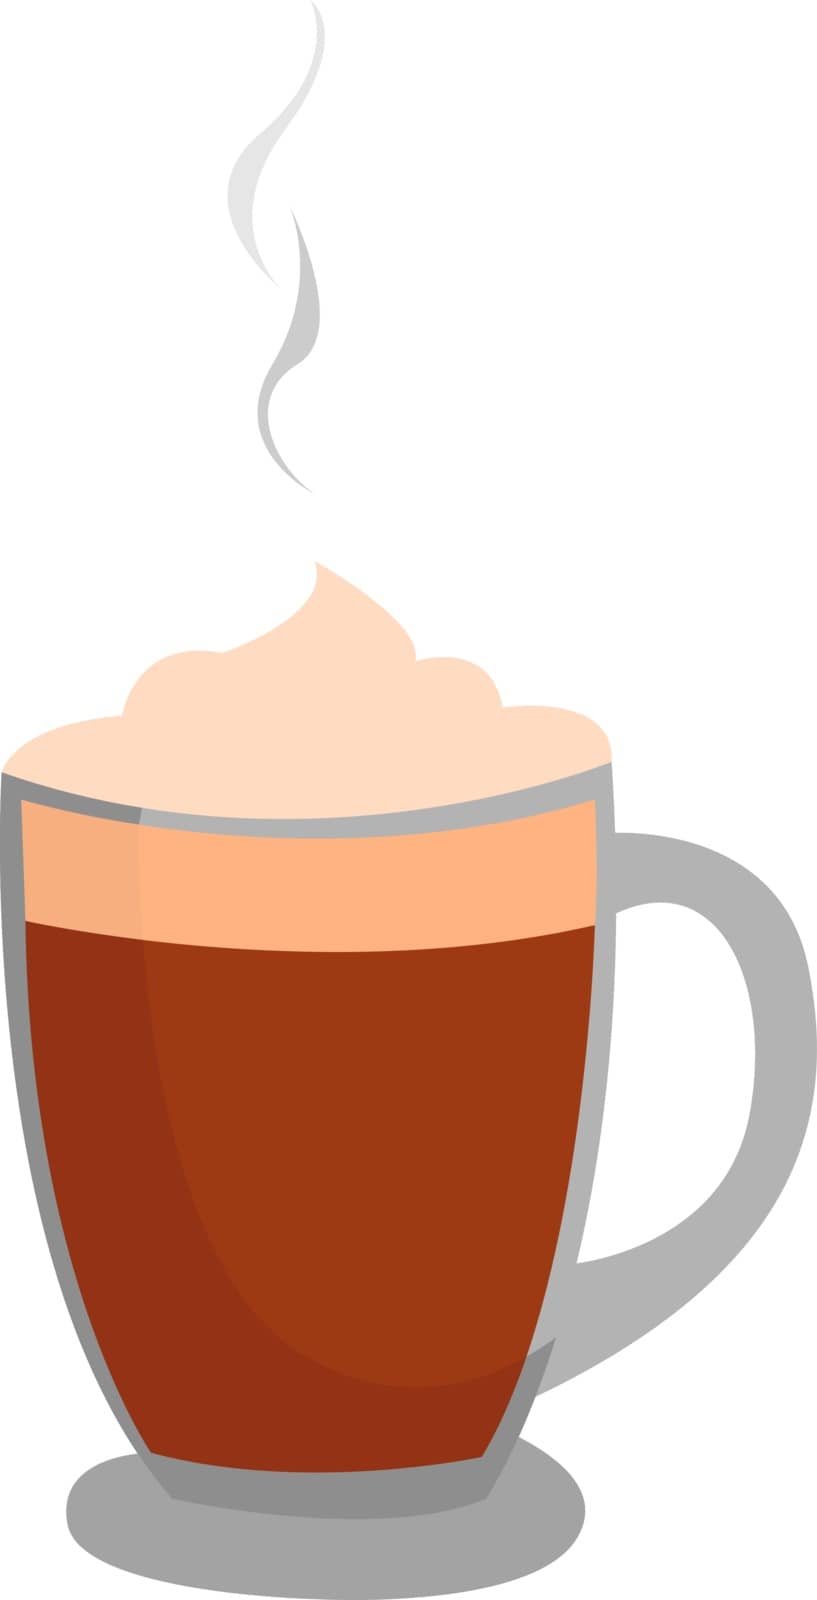 Morning coffee, illustration, vector on white background.